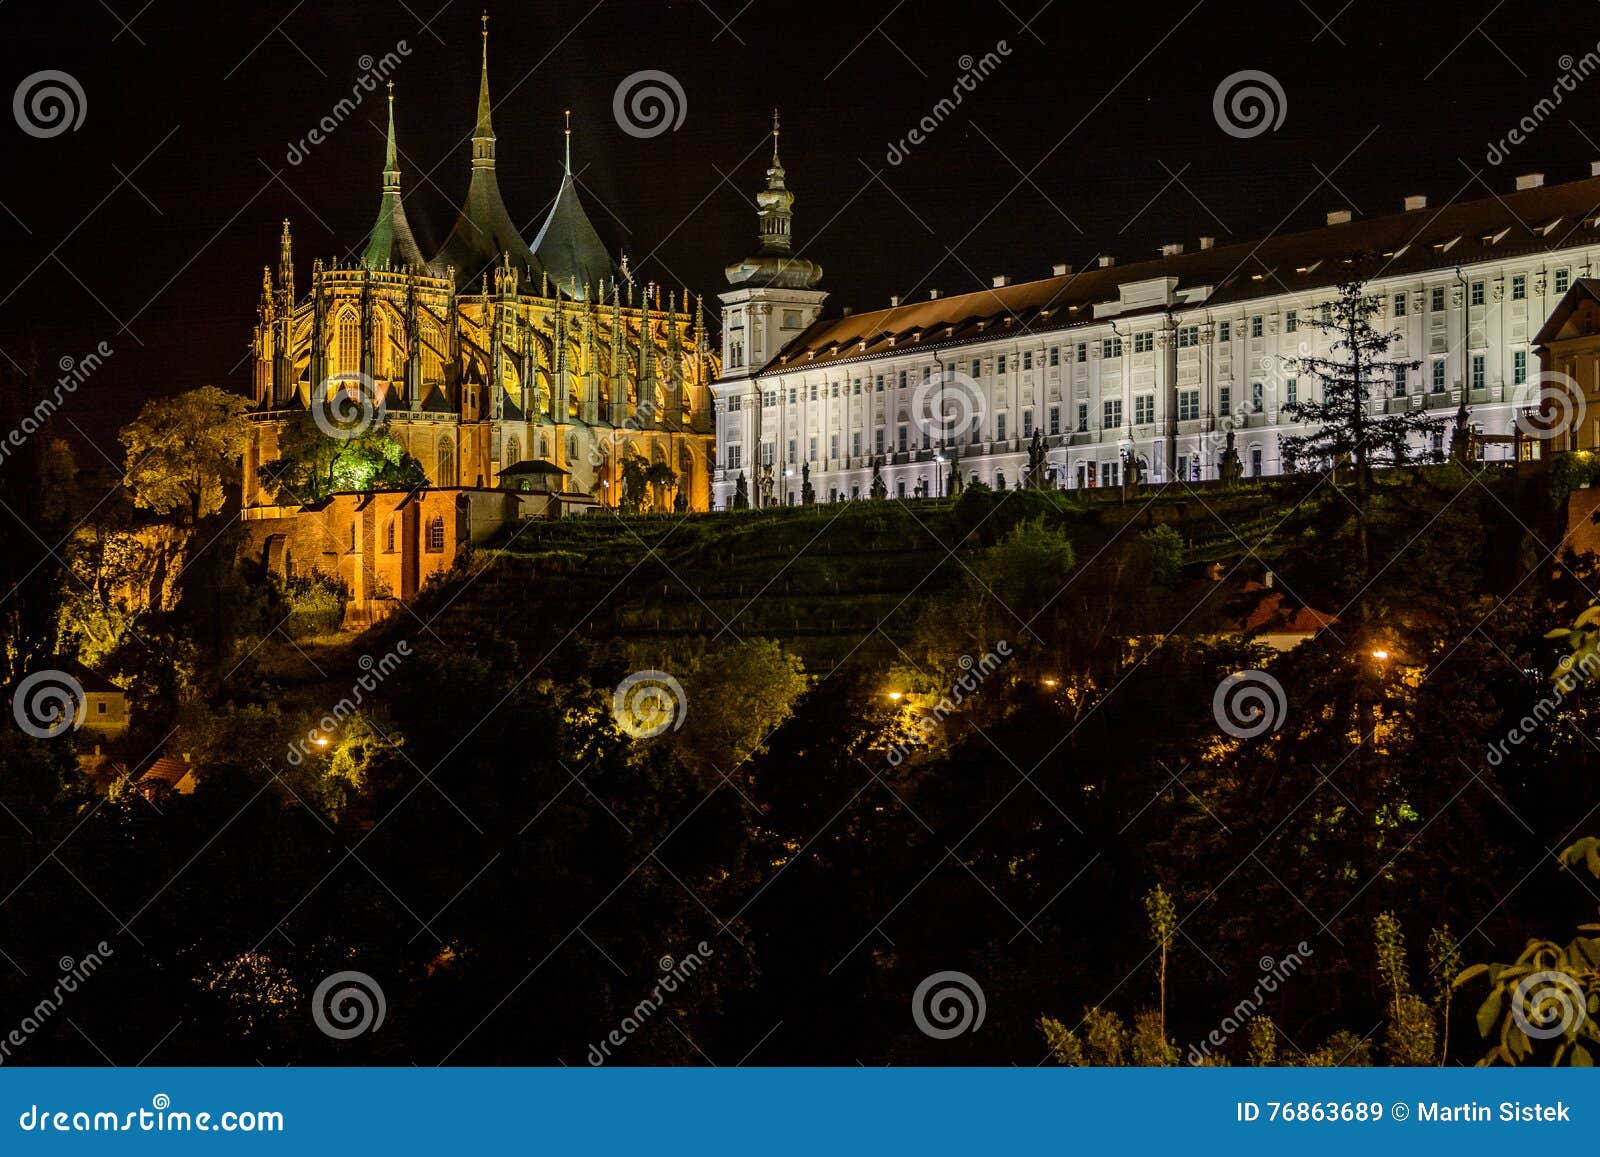 Saint Barbara Church in Kutna Hora, Czech Republic. UNESCO. One of the most famous Gothic churches in central Europe, World Heritage Site.